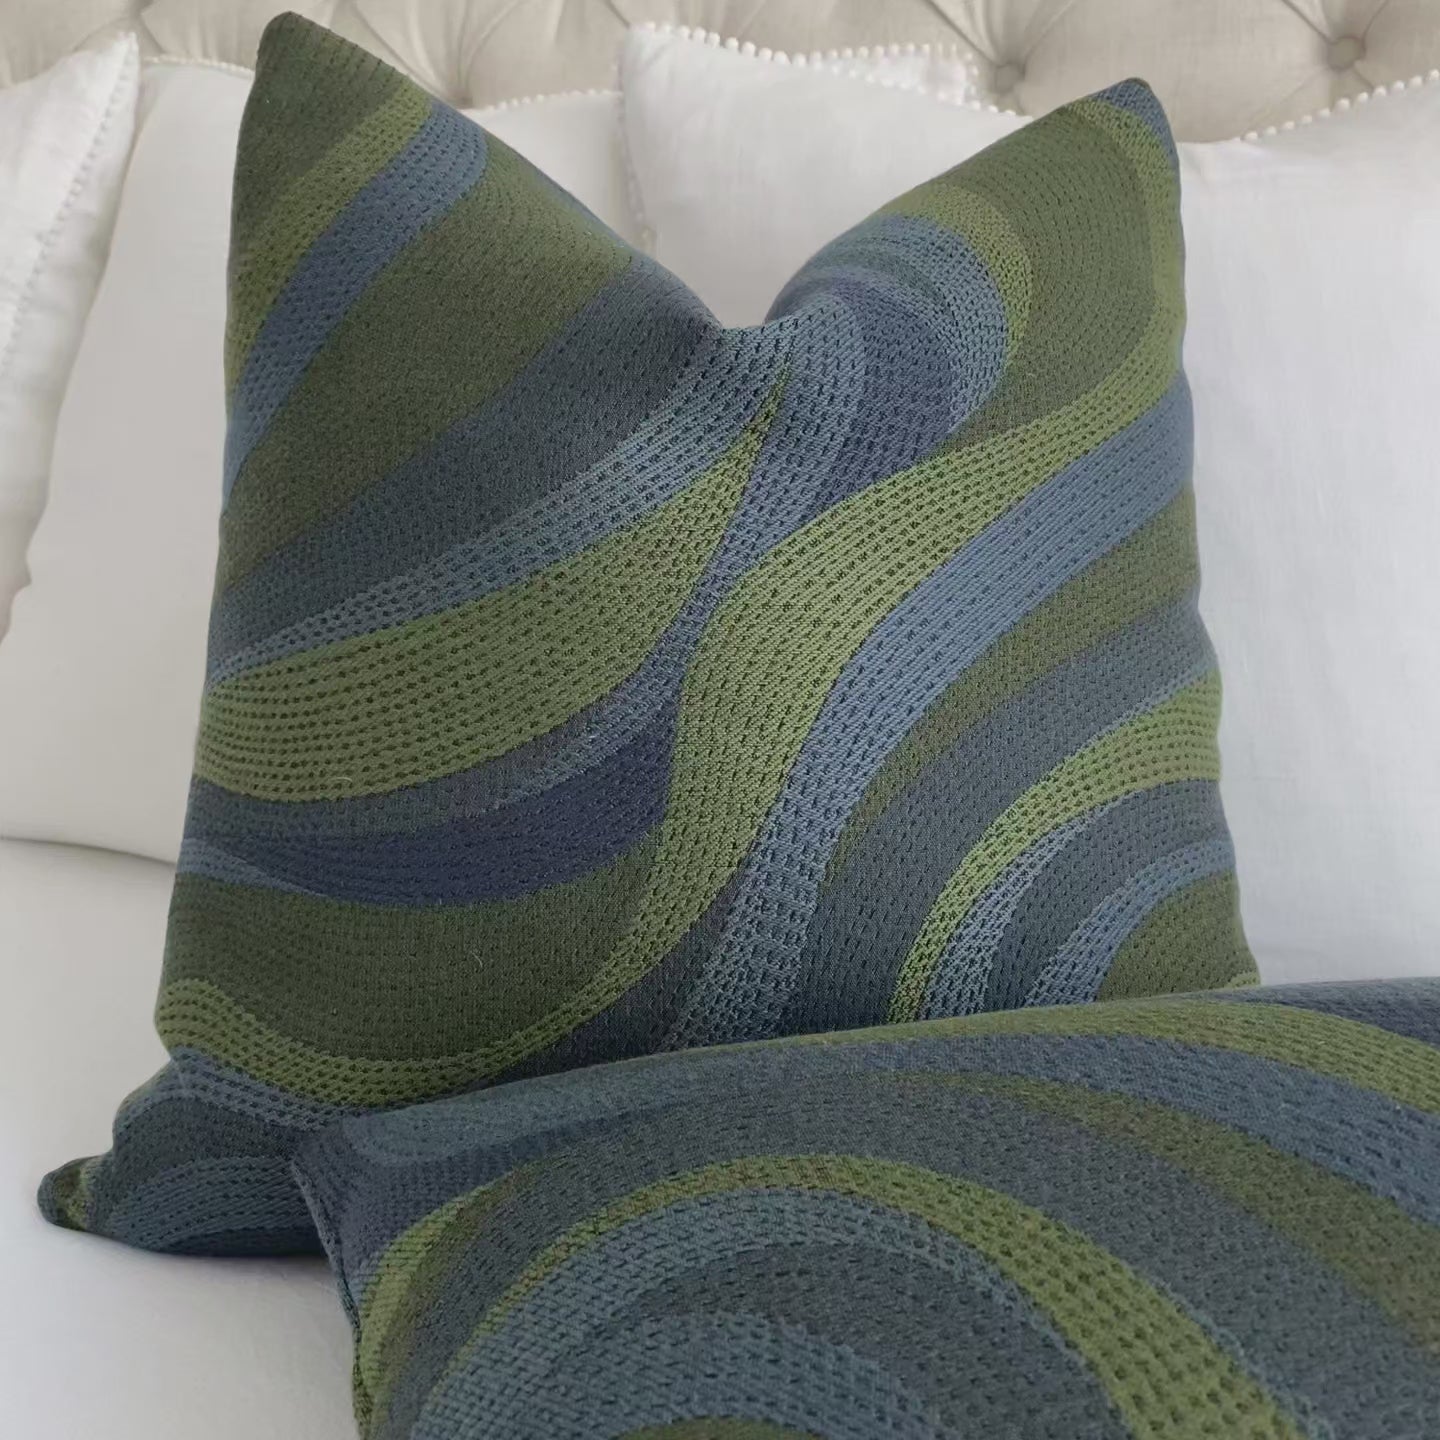 Thibaut Passage Lagoon Blue and Green Woven Performance Luxury Designer Decorative Throw Pillow Cover Product Video